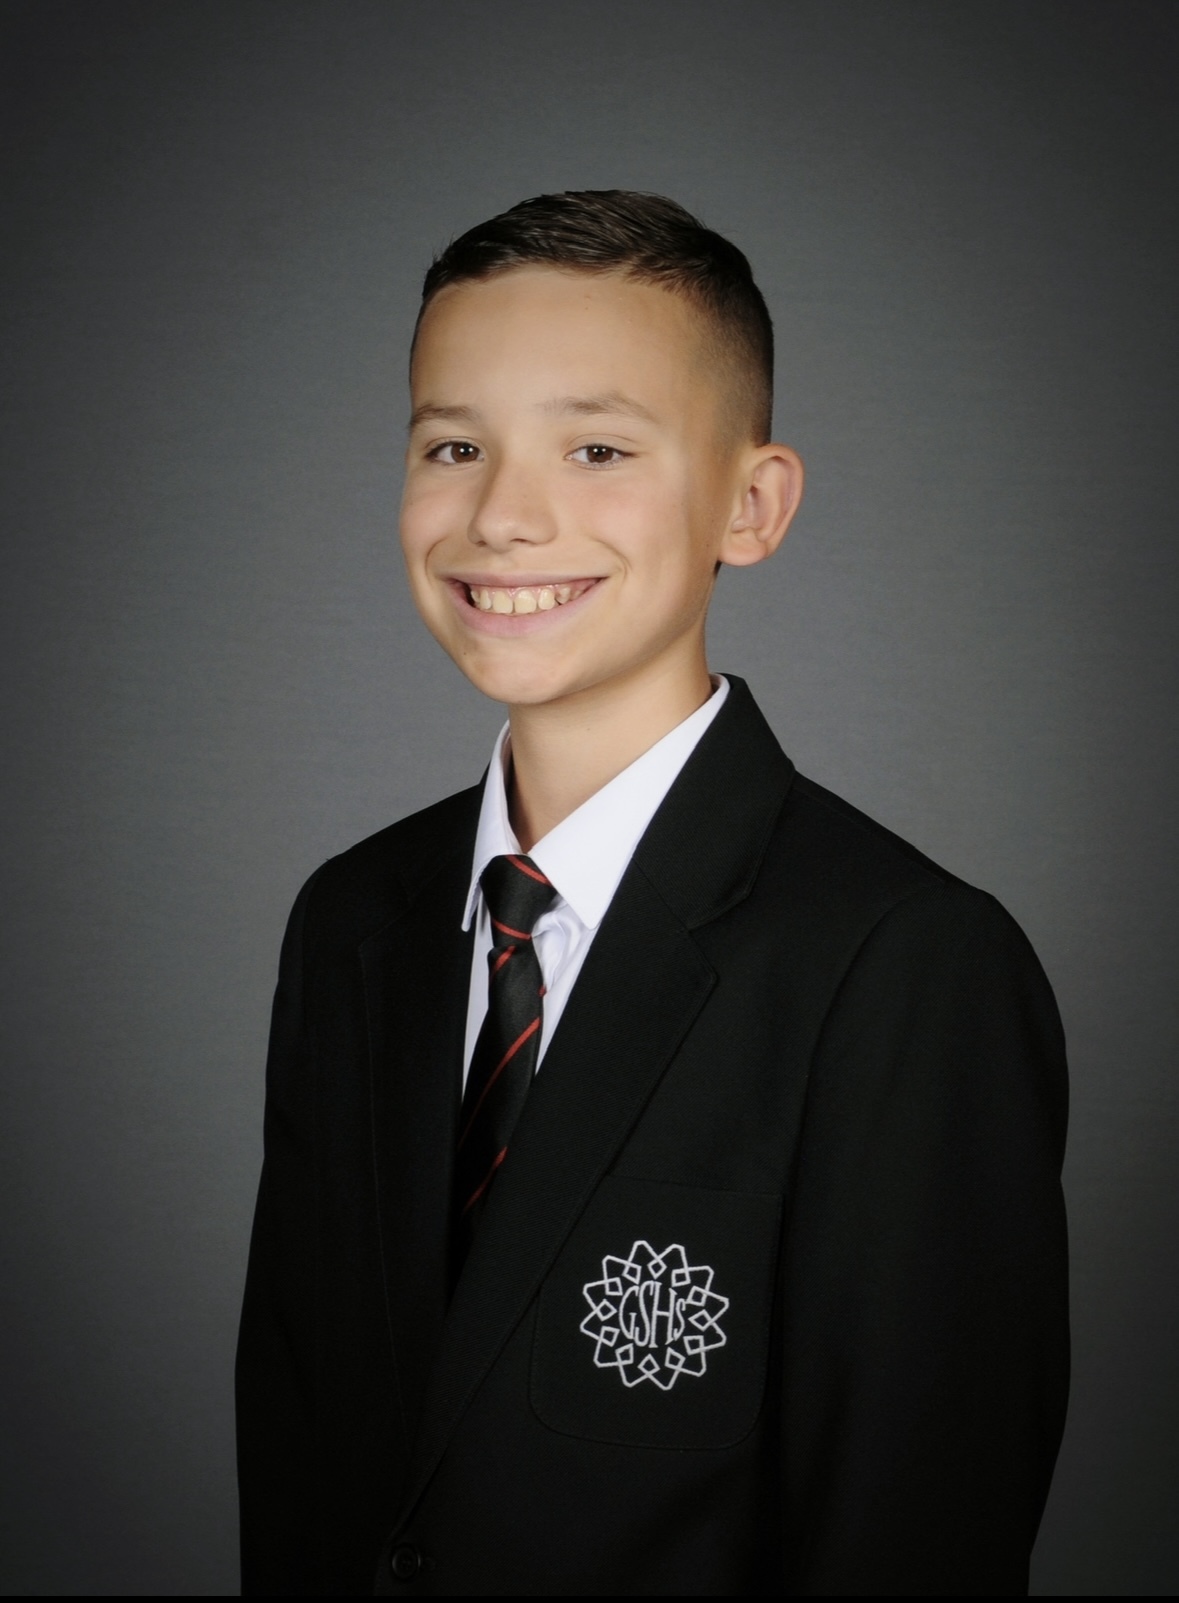 Harrison is in year eight at Great Sankey High School